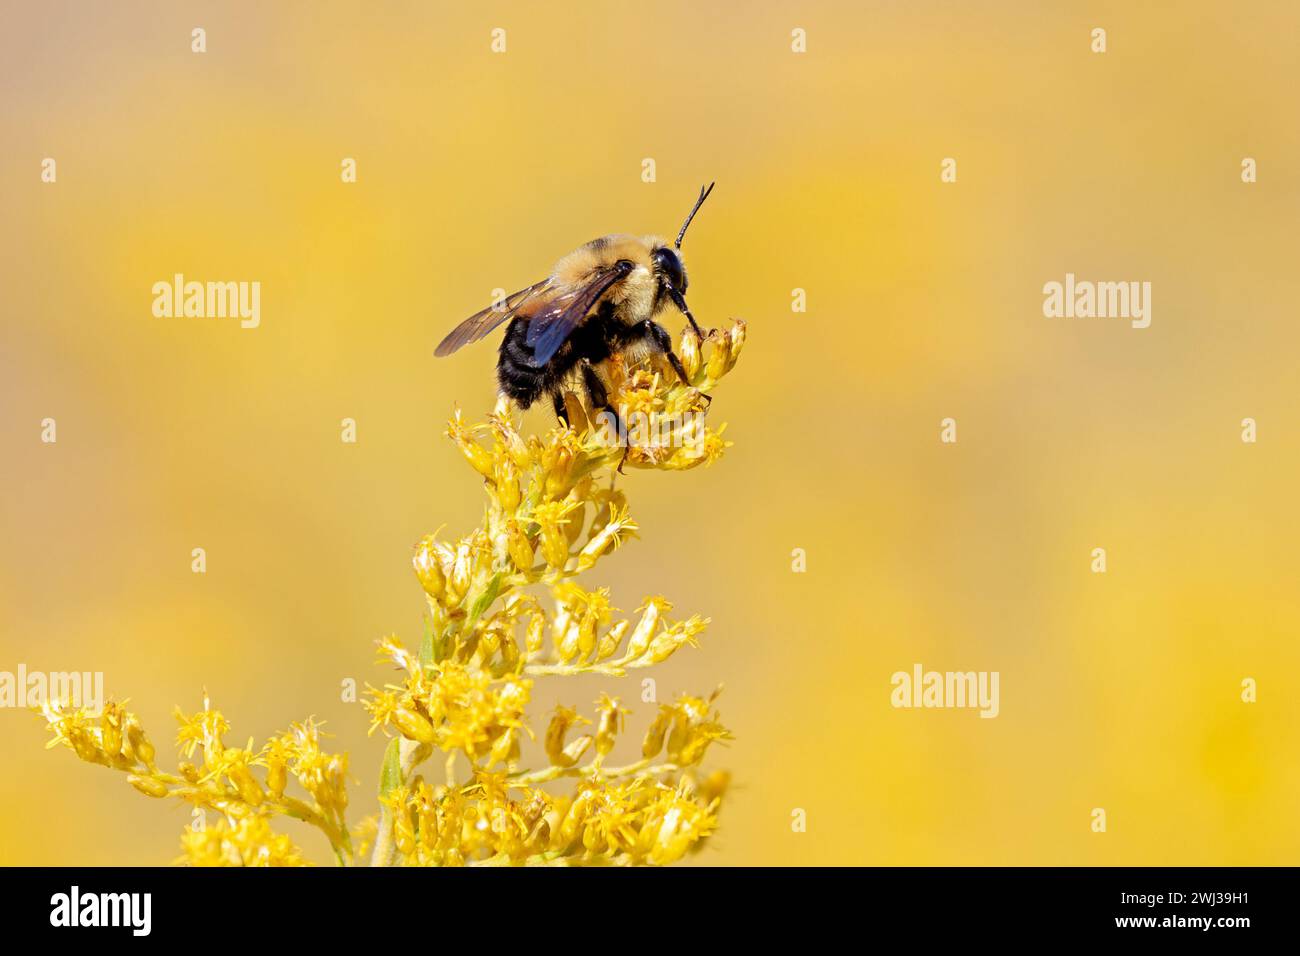 A bumble bee pollinates a goldenrod wildflower. Soft yellow background of the goldenrod field Stock Photo